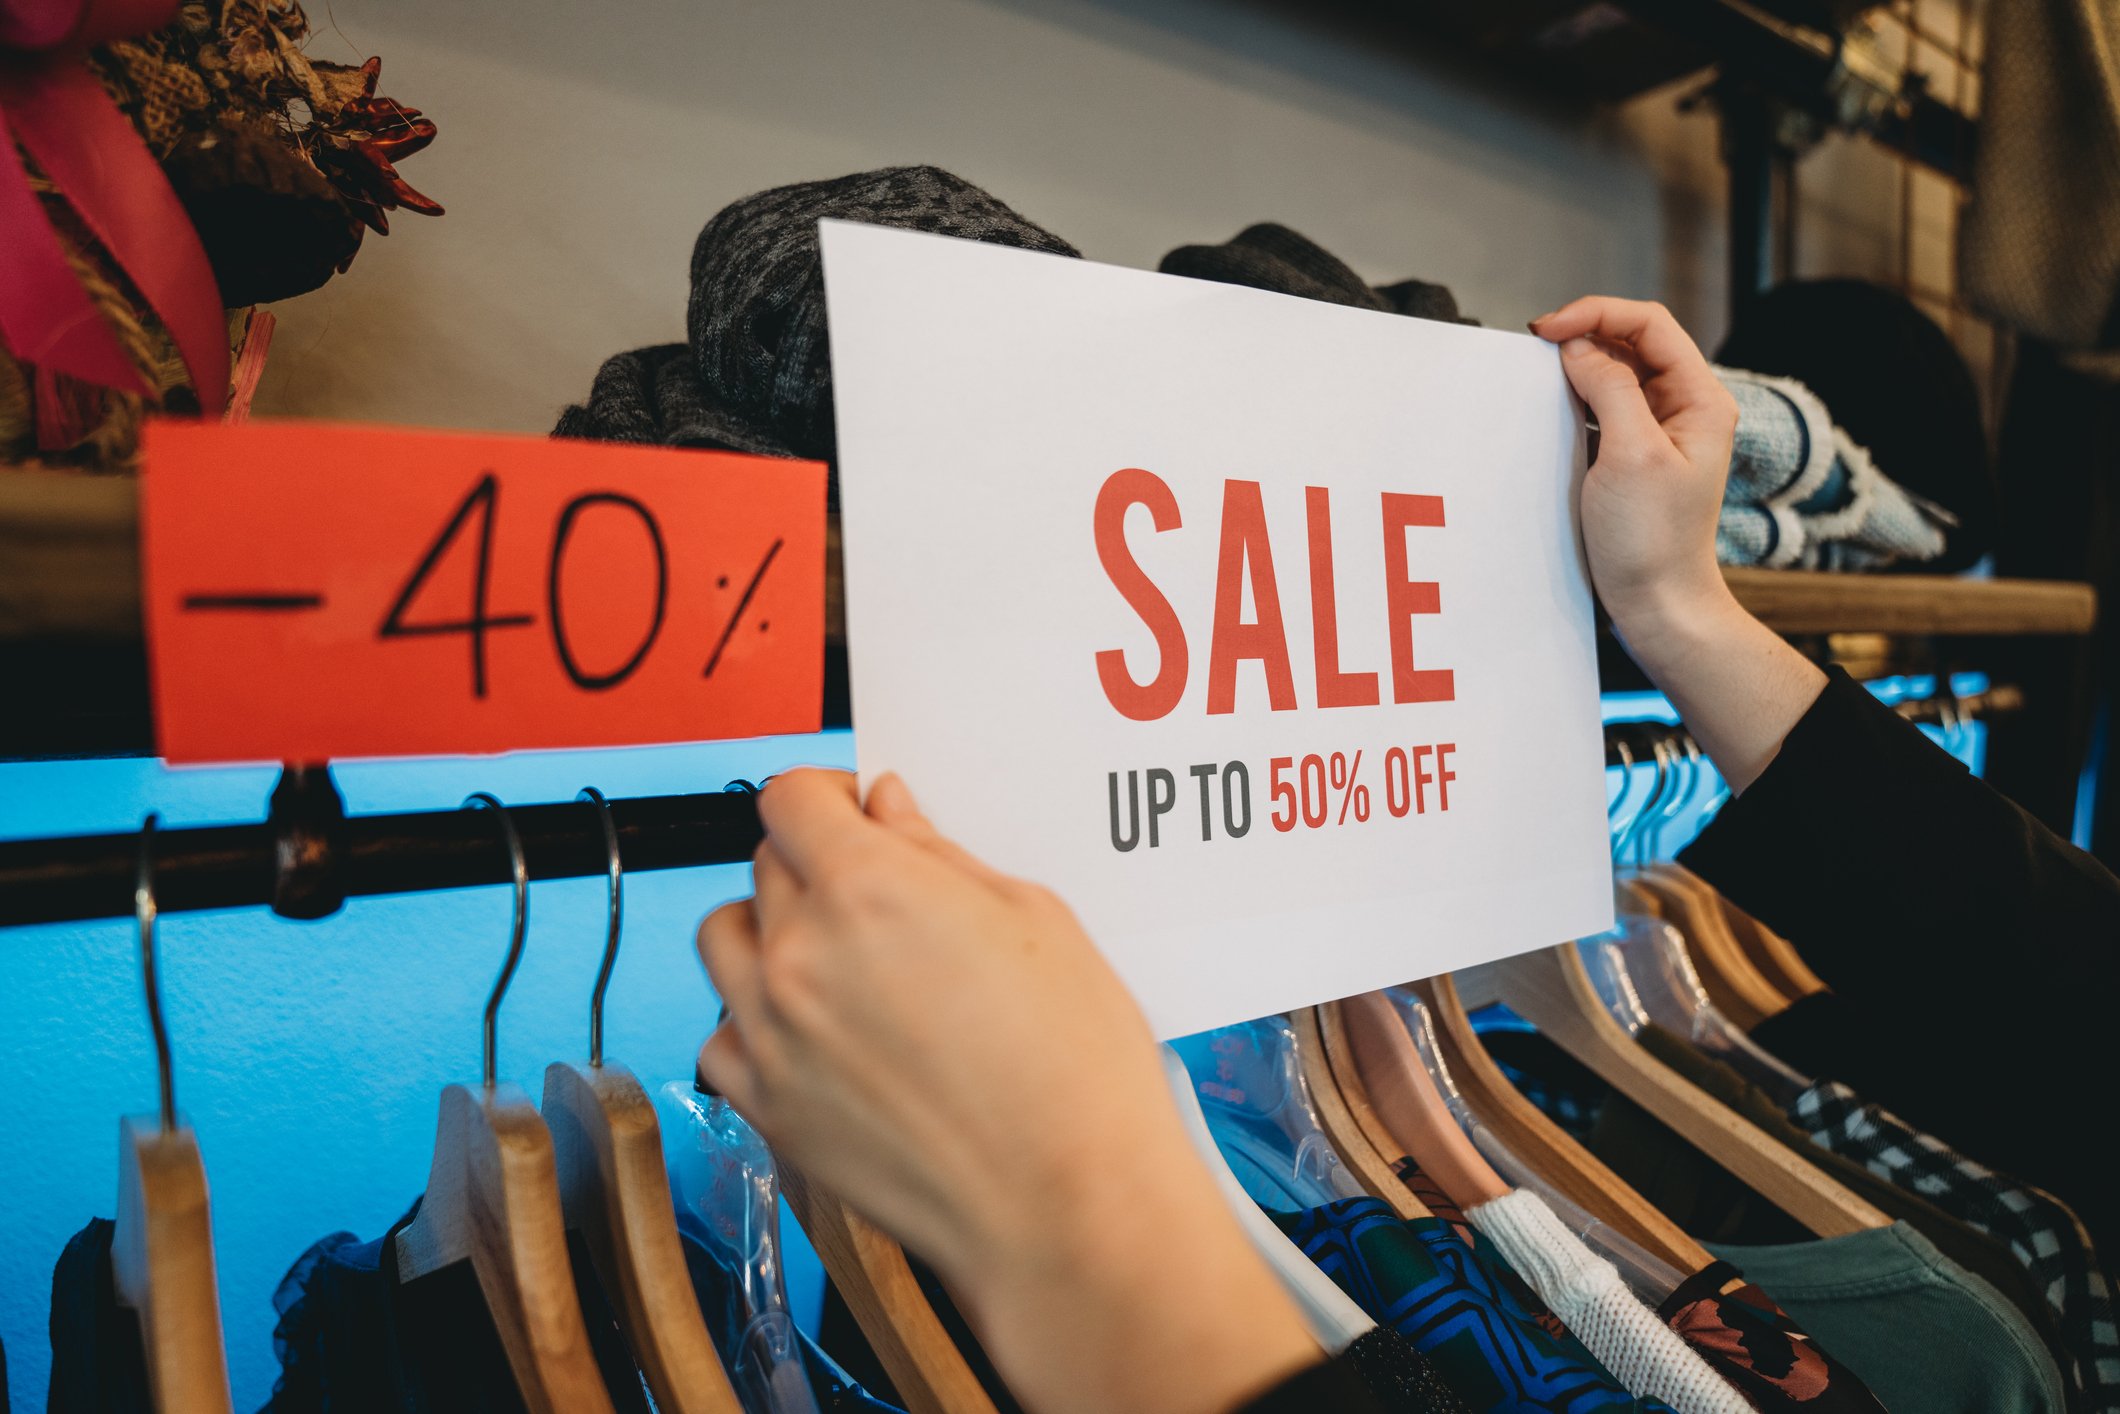 Clothes rail with discount sign